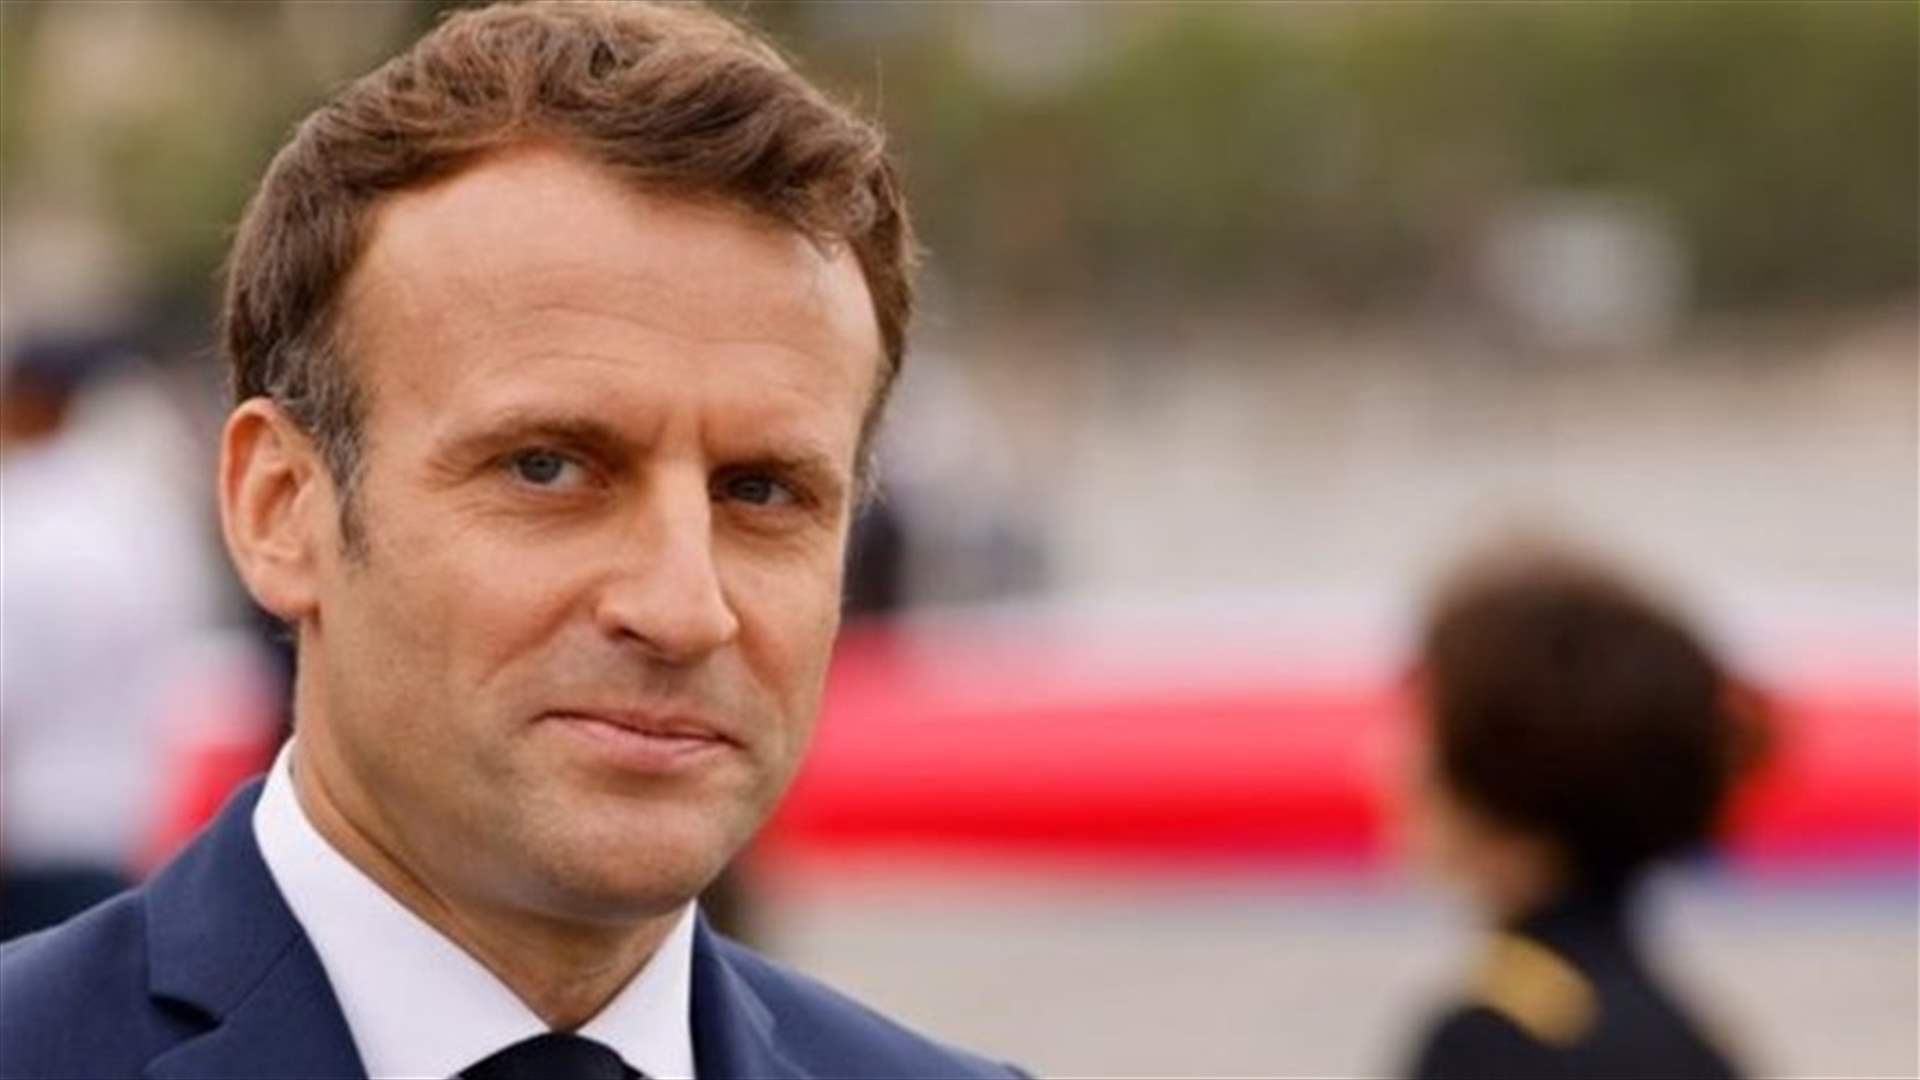 One year after Beirut Port blast, Macron: Lebanon can continue to rely on France